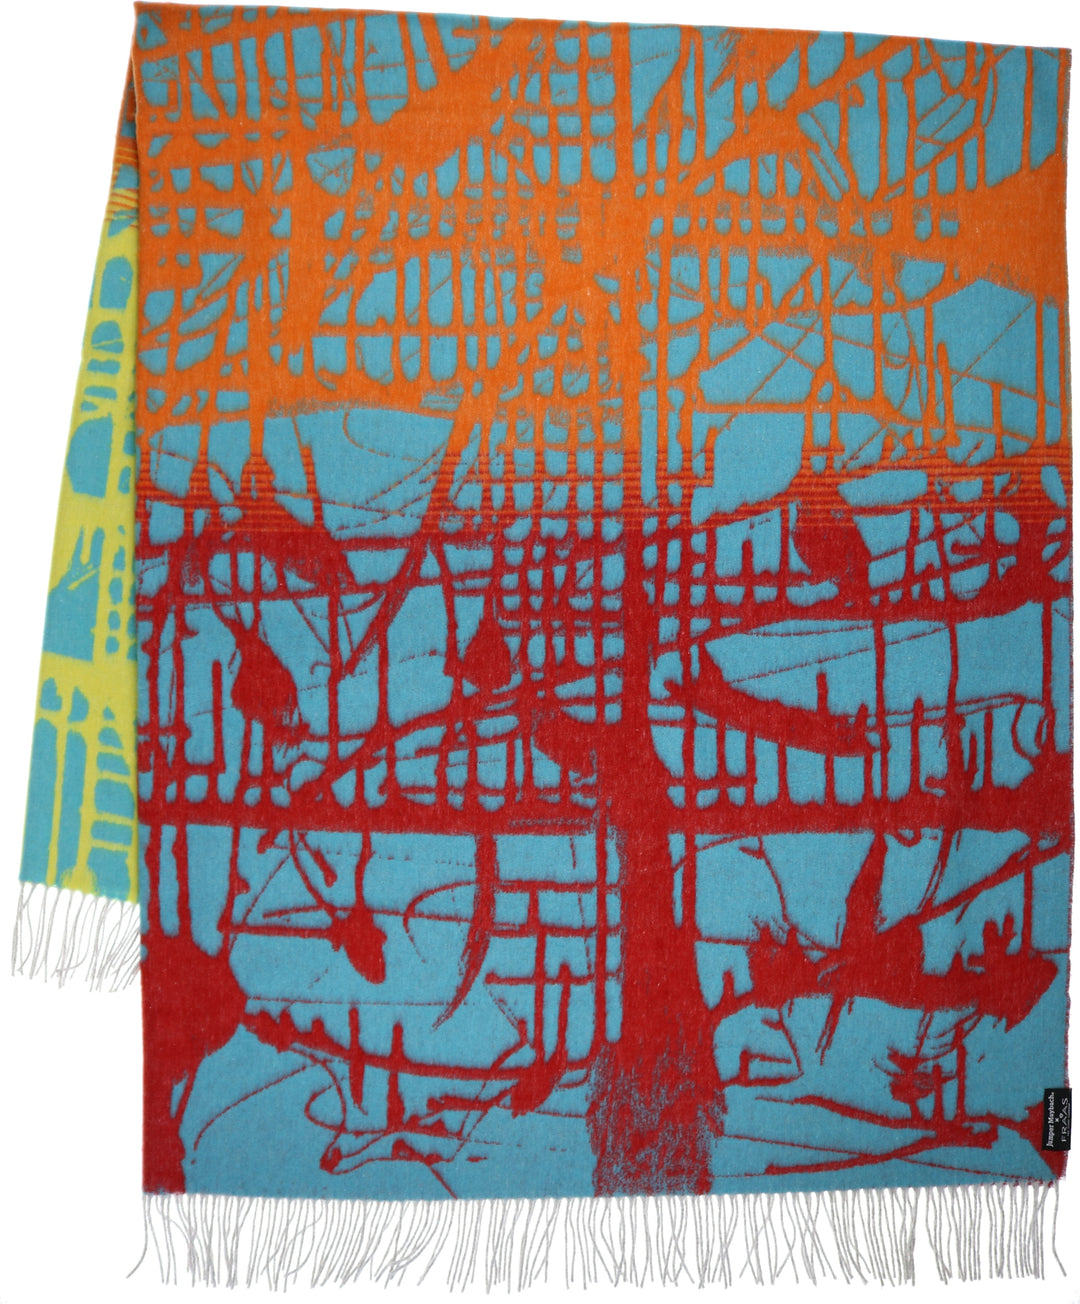 Jumper Maybach X FRAAS "Matrix" Recycled Cotton Throw - Turquoise